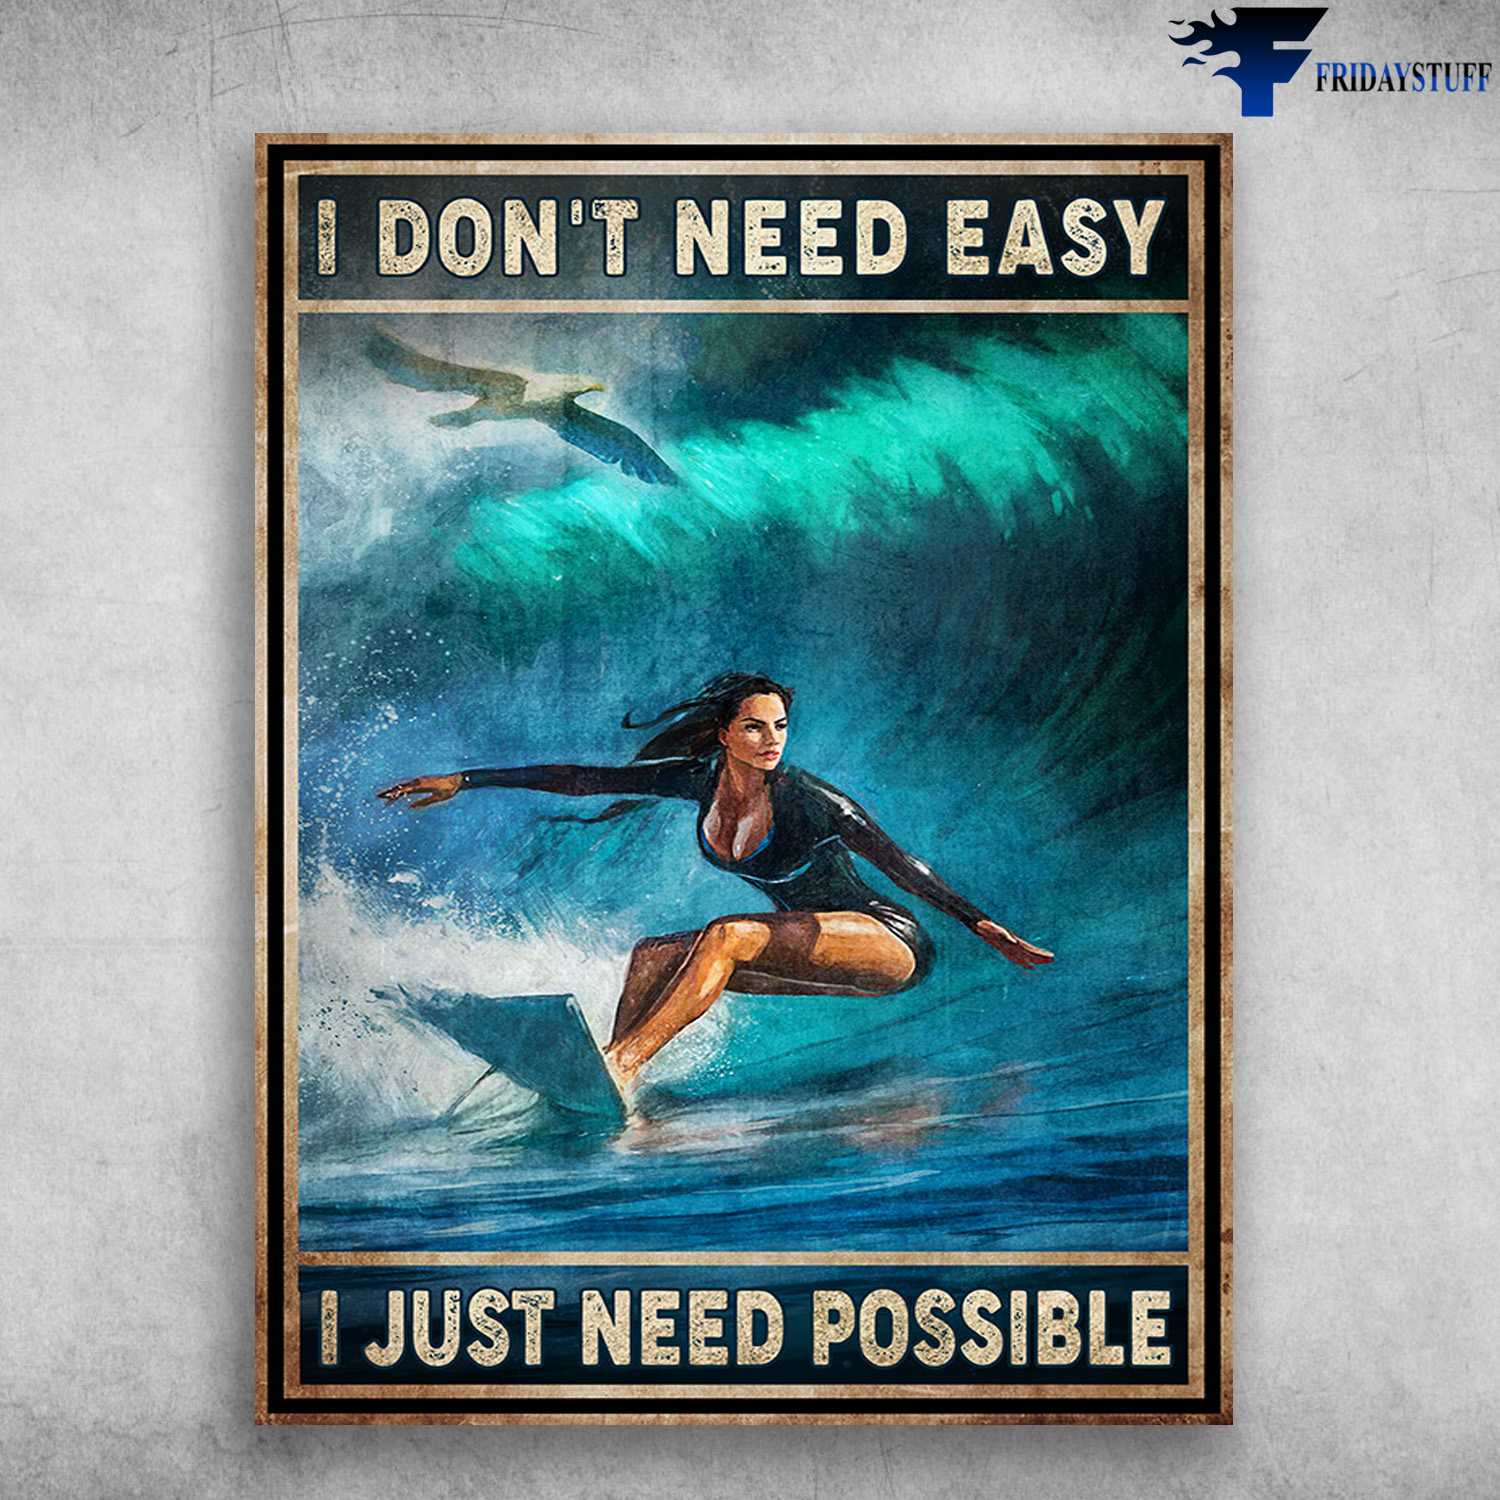 symmetri Flad Wow Surfing Poster, Girl Surfing - I Don't Need Easy, I Just Need Possible -  FridayStuff